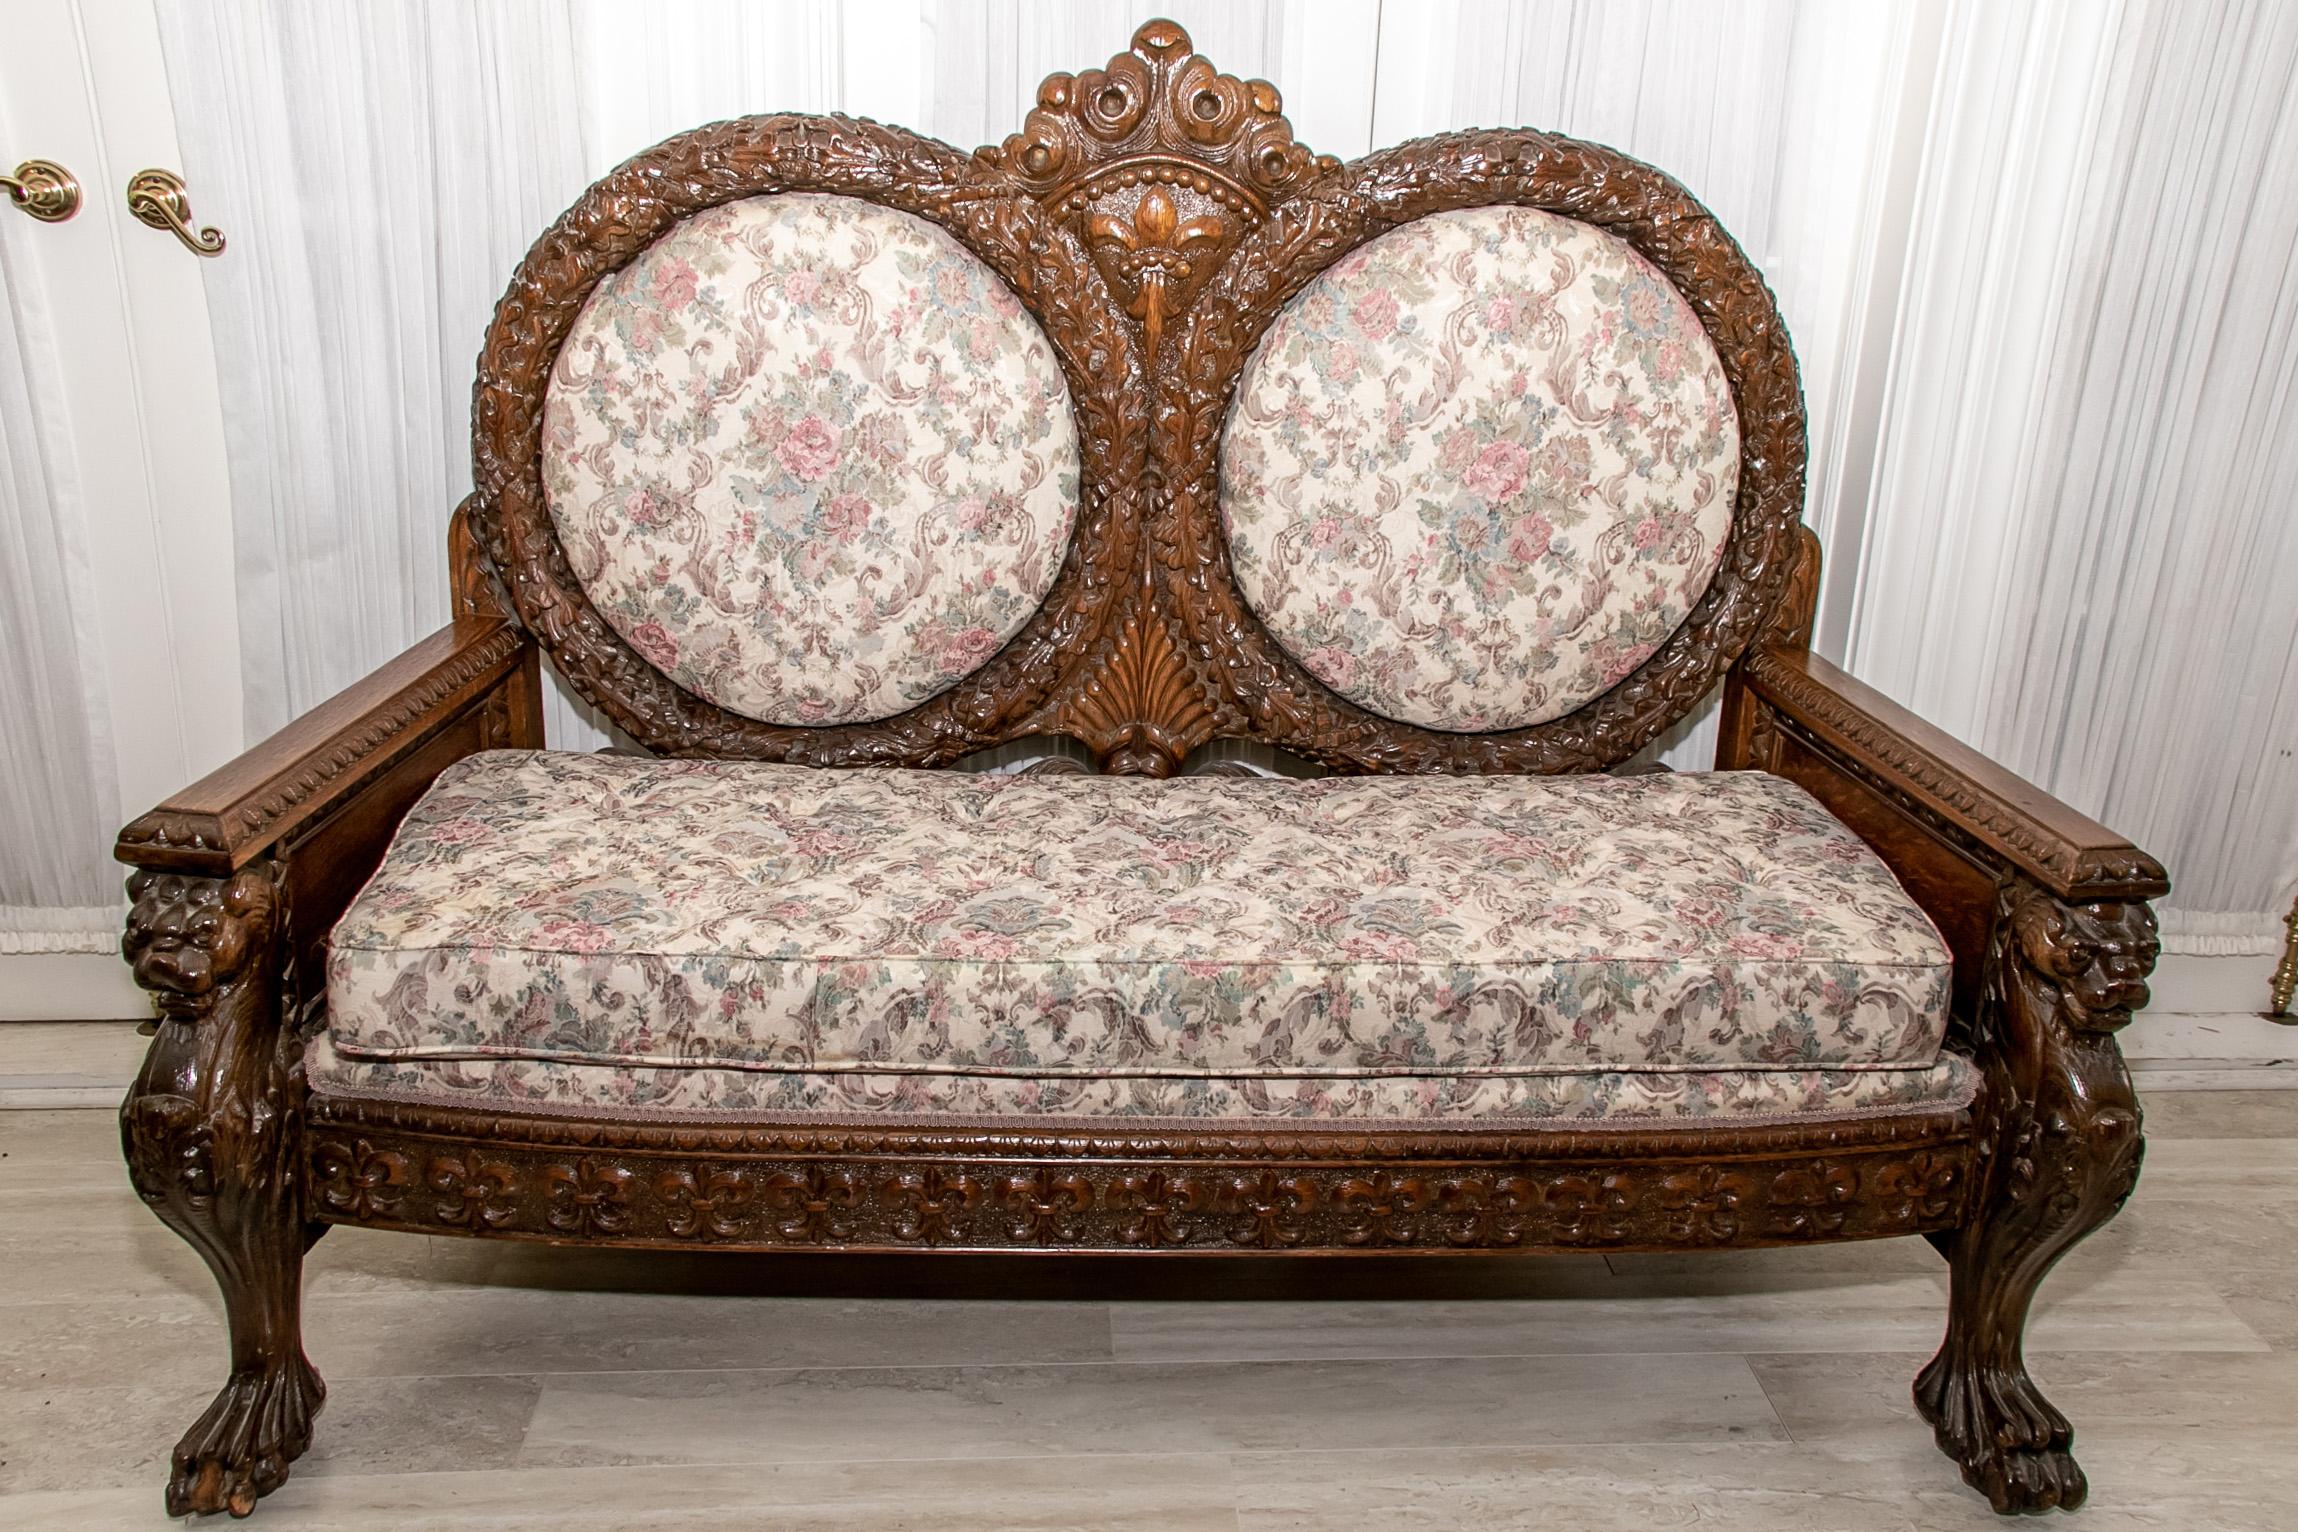 Late 19th century carved settee, oak, double balloon back with scrolled foliate carved motif and central fleur-de-lis crest, scrolled floral upholstered inset backs and long seated cushion, fleur-de-lis relief carvings along skirt flanked with two